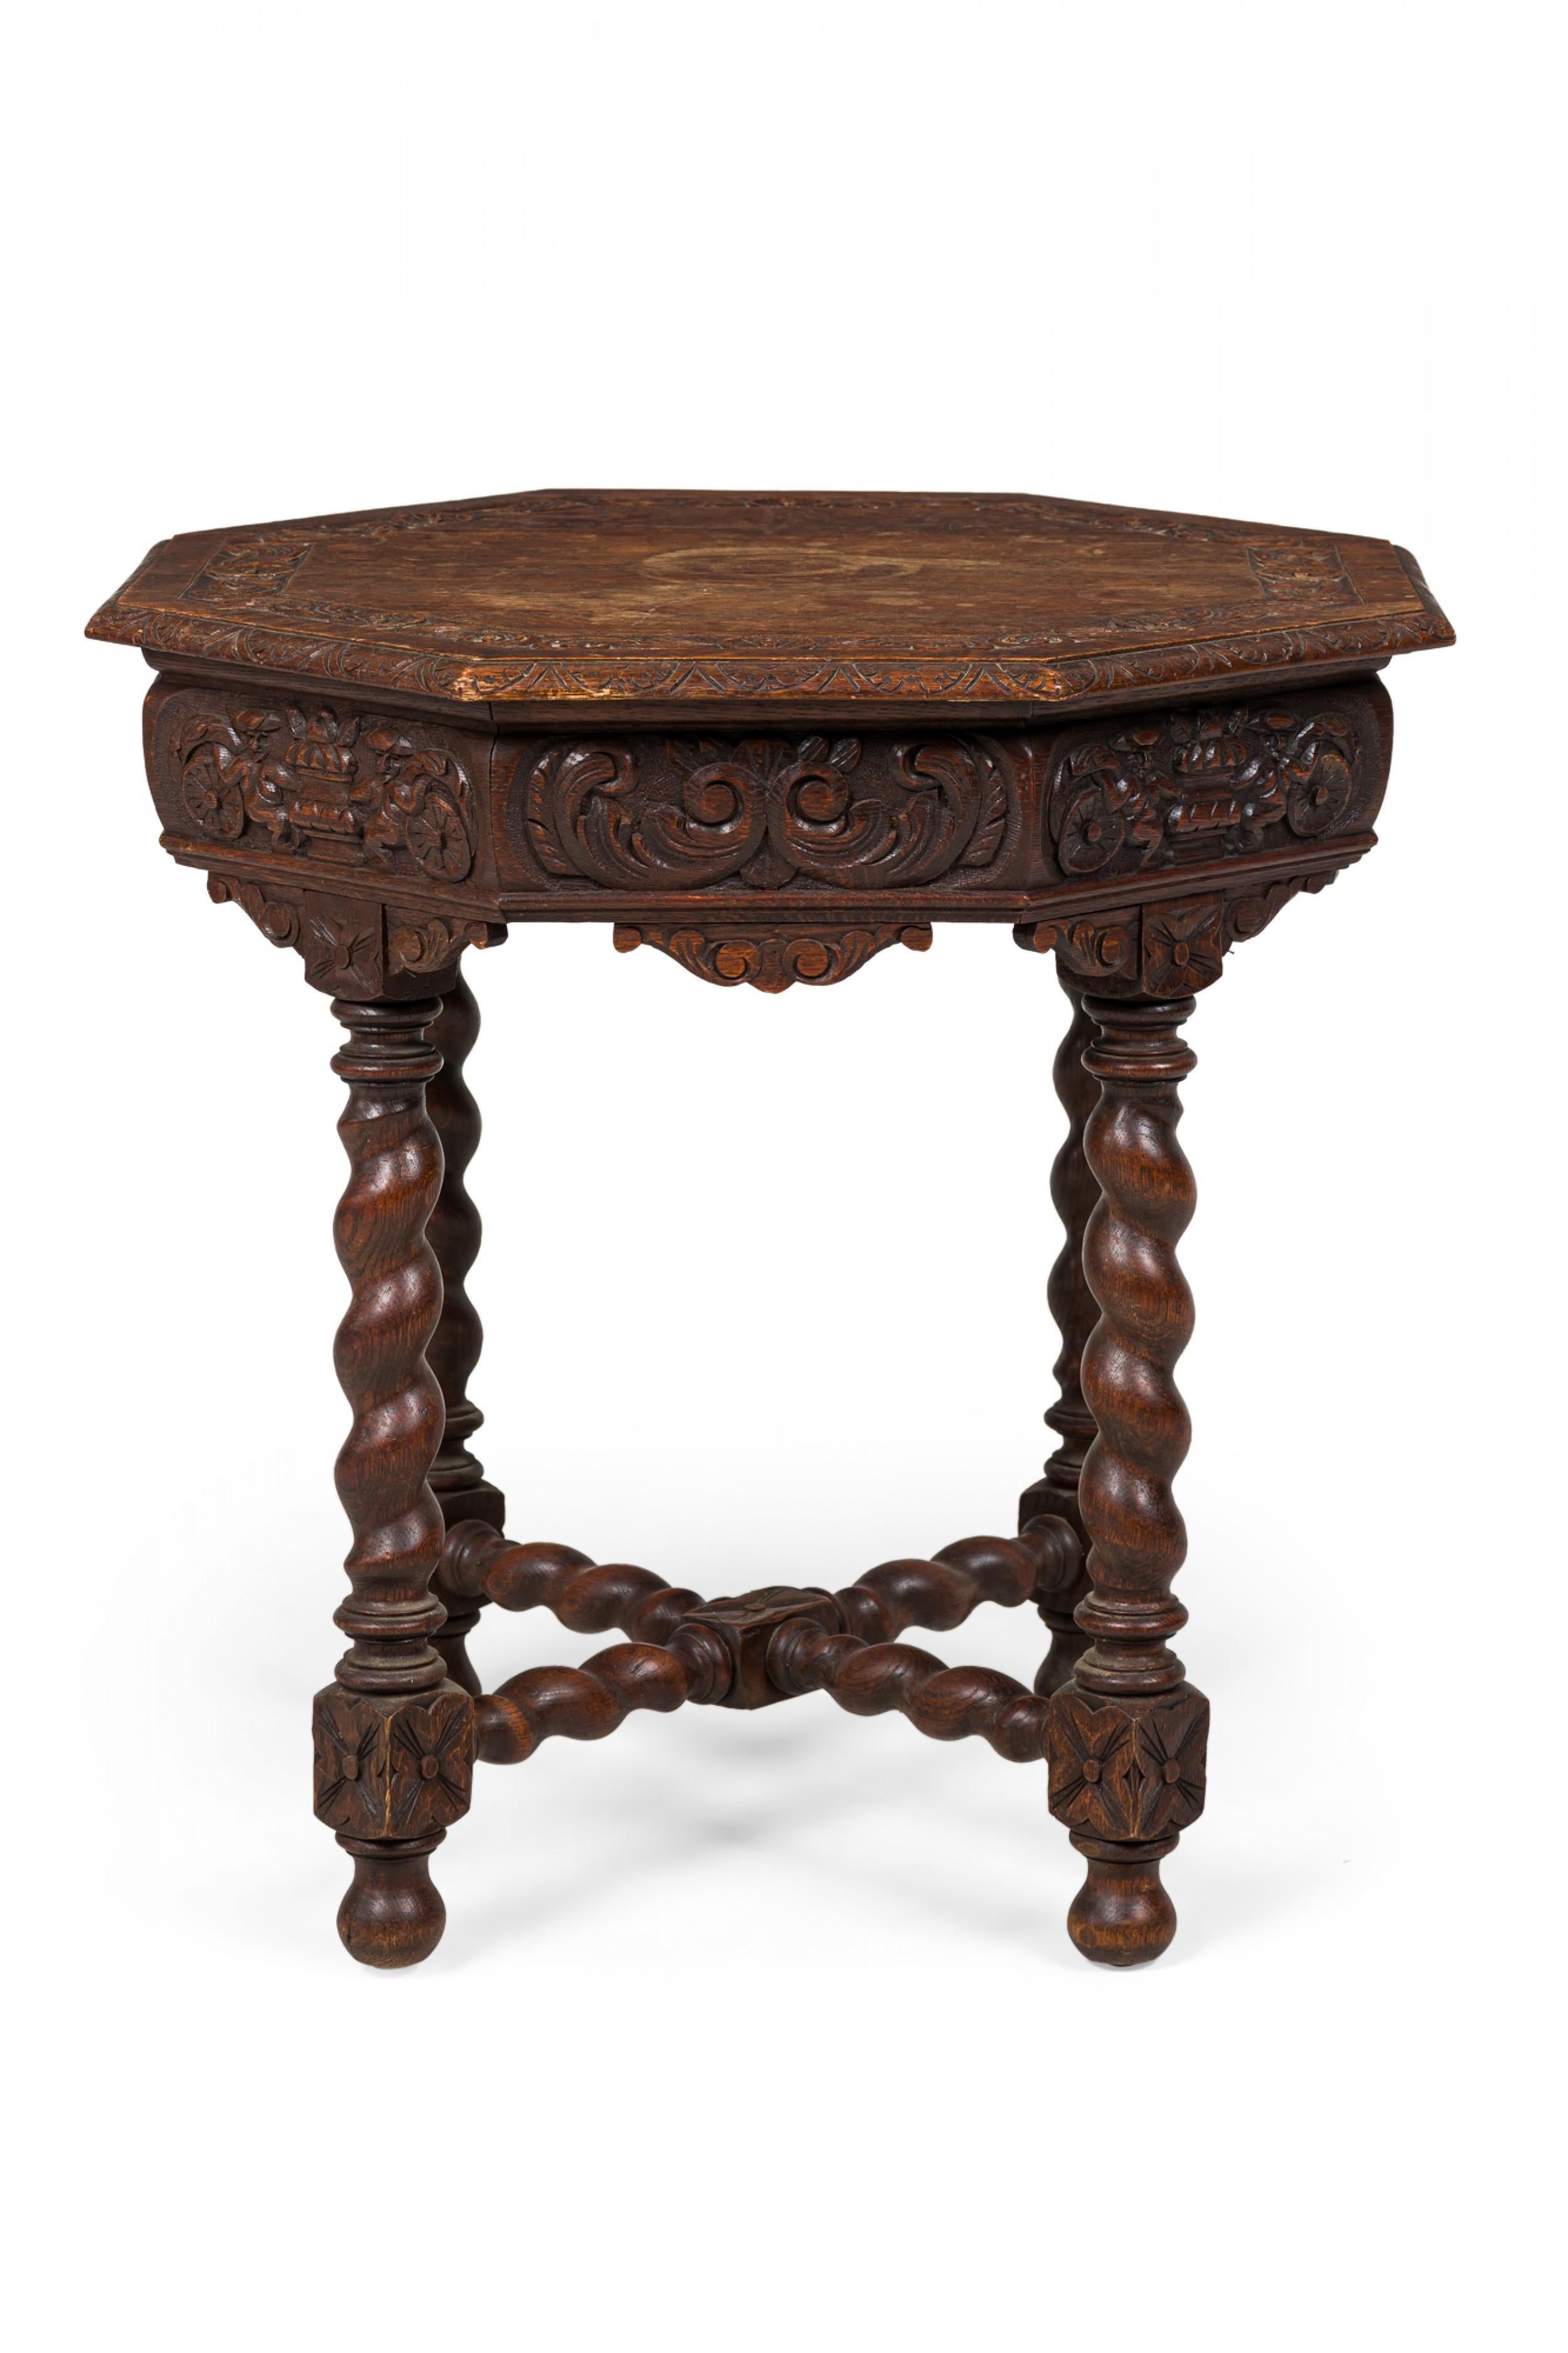 English Jacobean-Style Carved Spiral Turned Leg Octagonal Occasional/Side Table For Sale 2